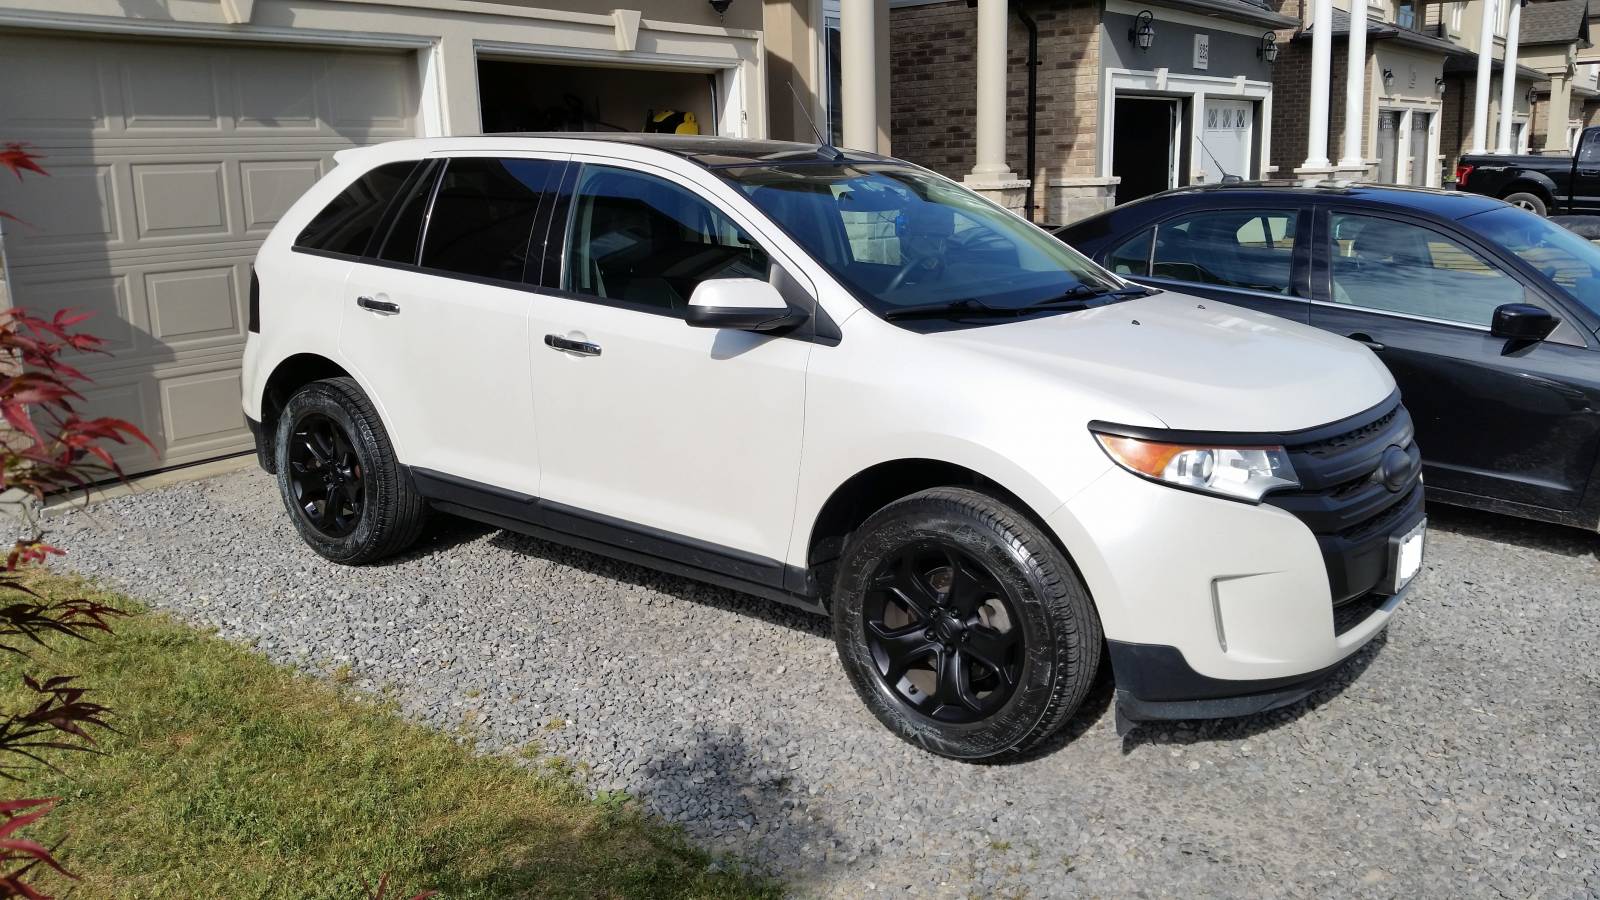 Vince's 2011 Ford Edge